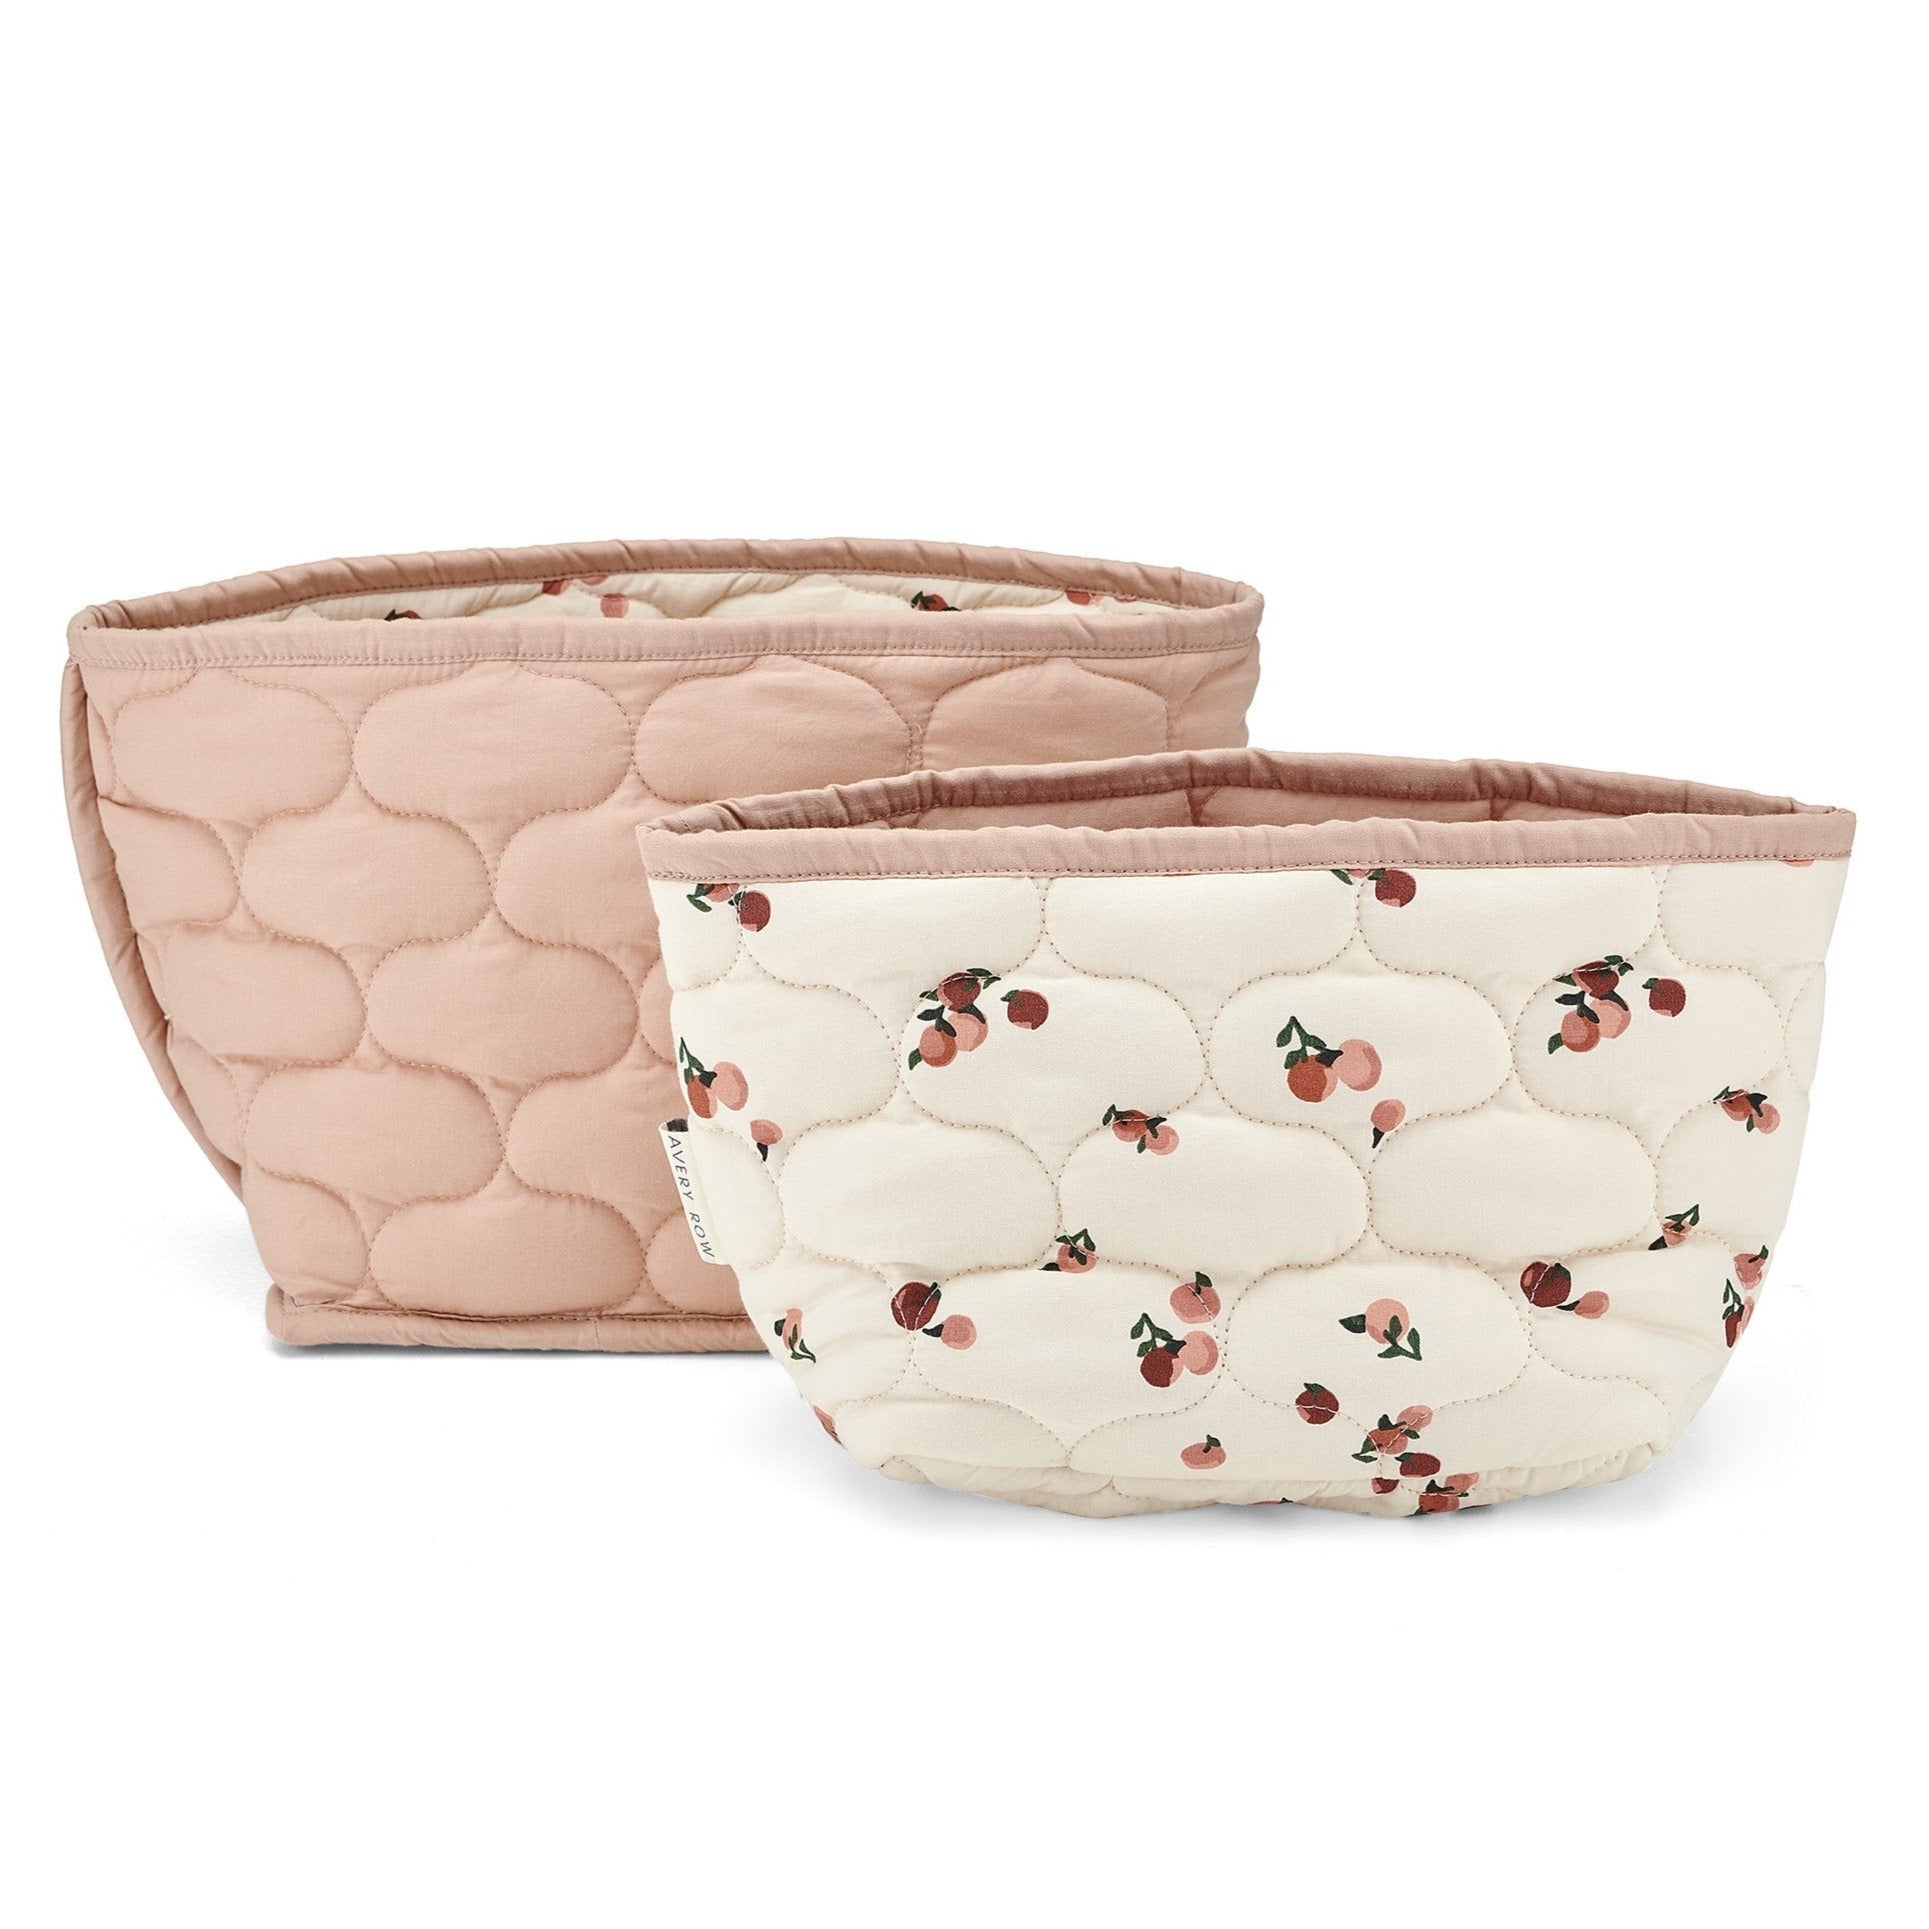 Small Quilted Storage Baskets Set of 2 - Peaches - Avery Row